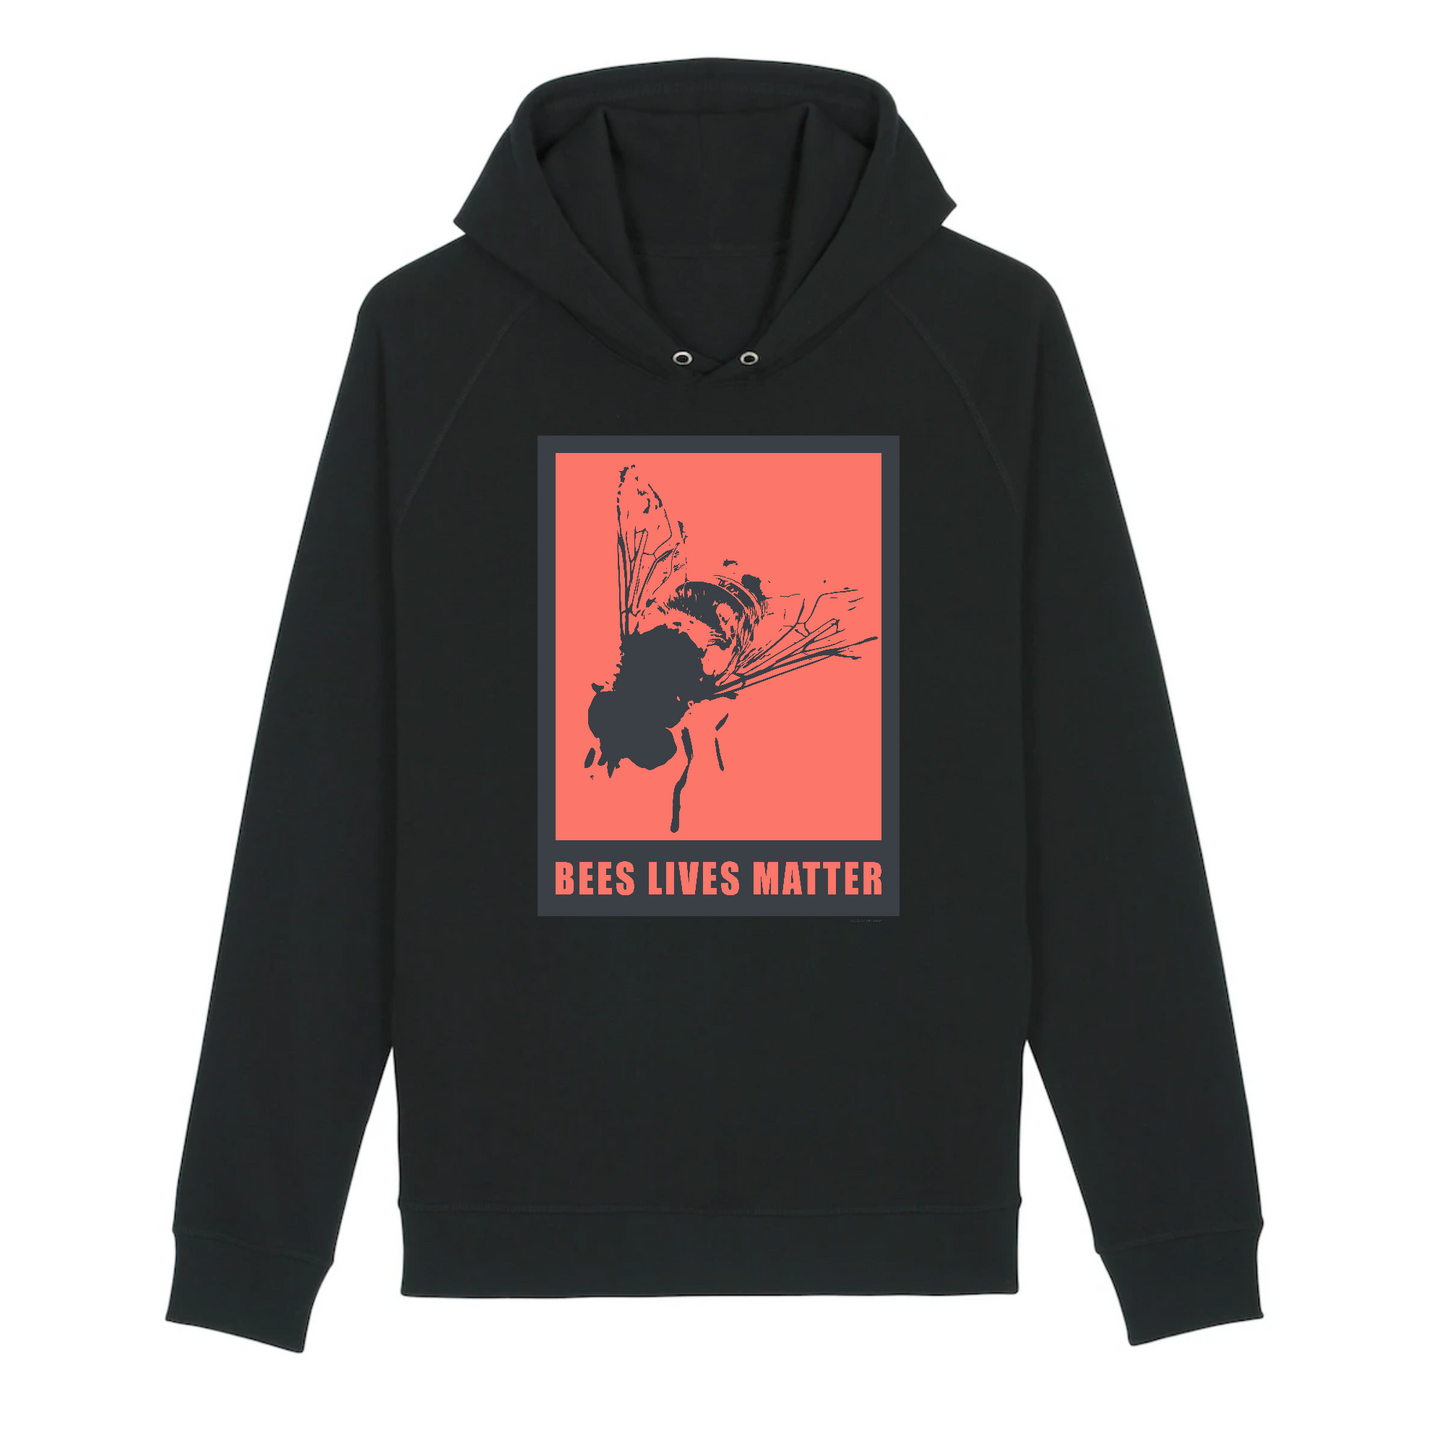 Unisex organic hoodie with bees lives matter print